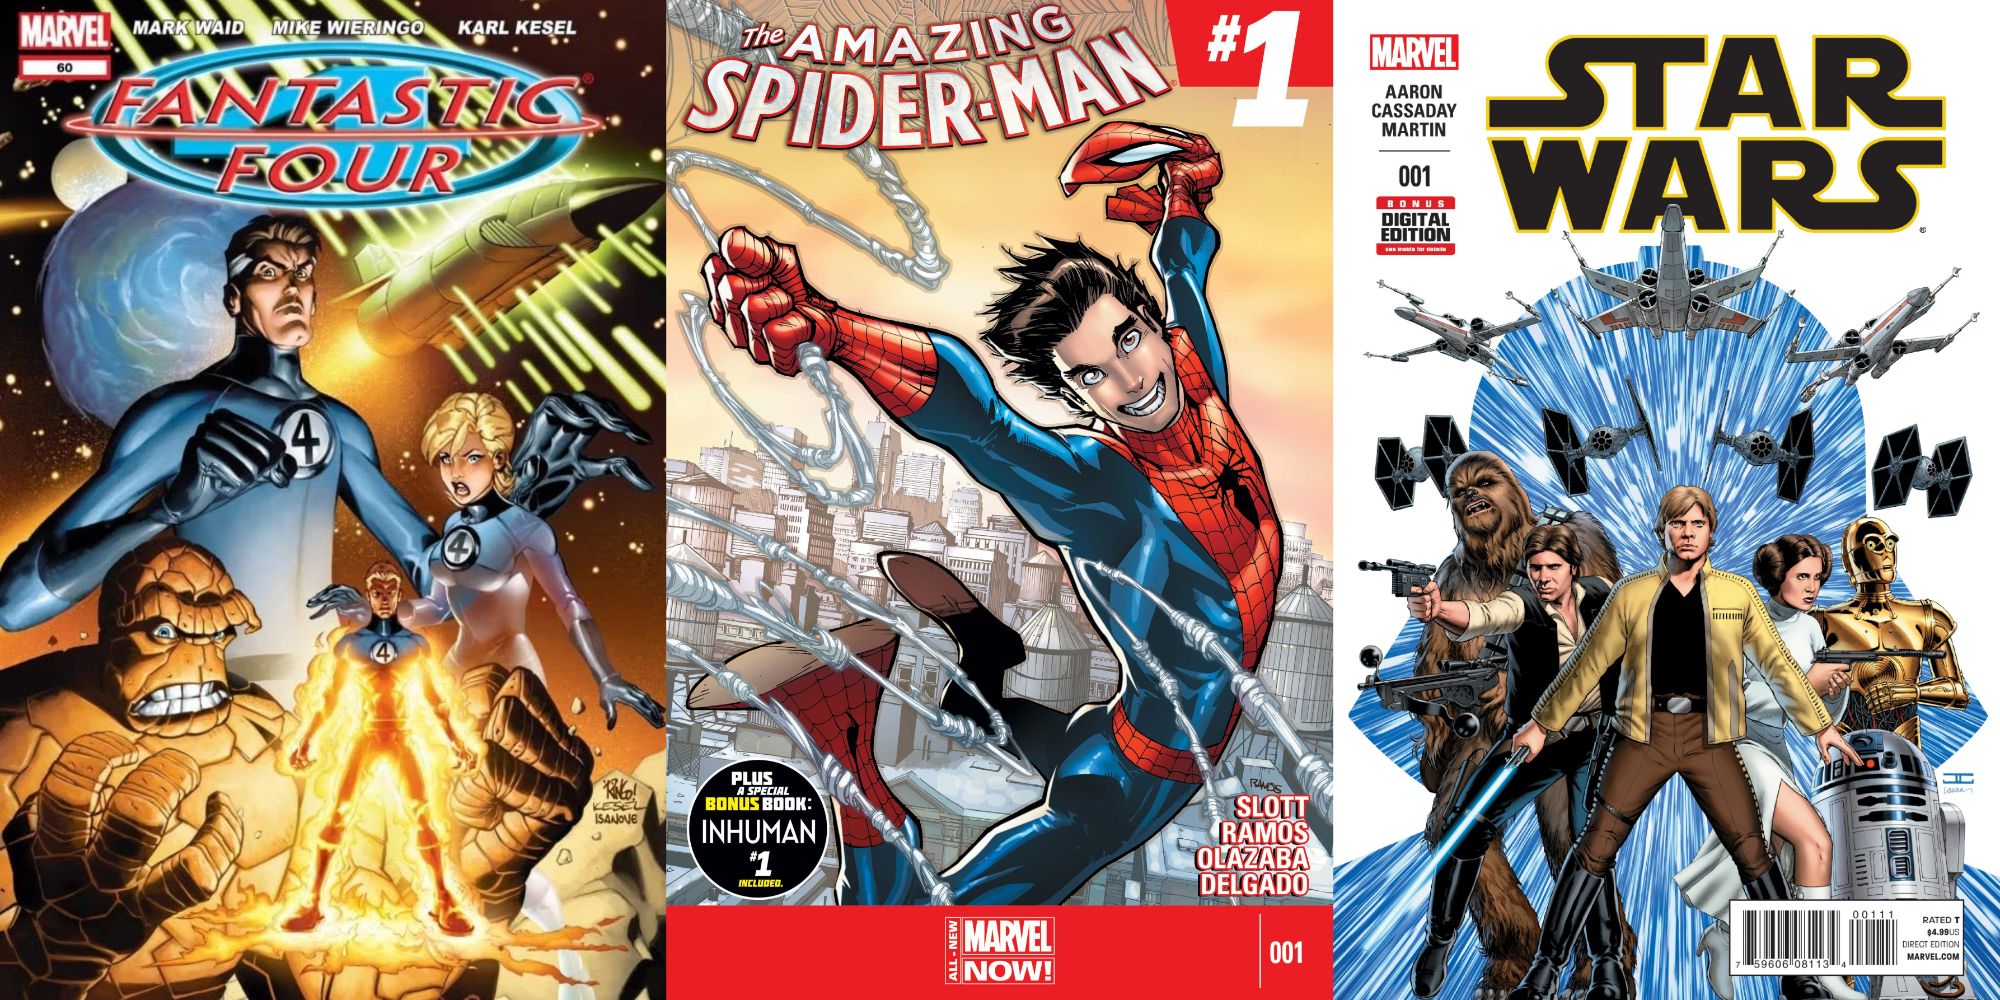 Split Image Fantastic 4 #60, The Amazing Spider Man 1 2014, Star Wars #1 2015 covers